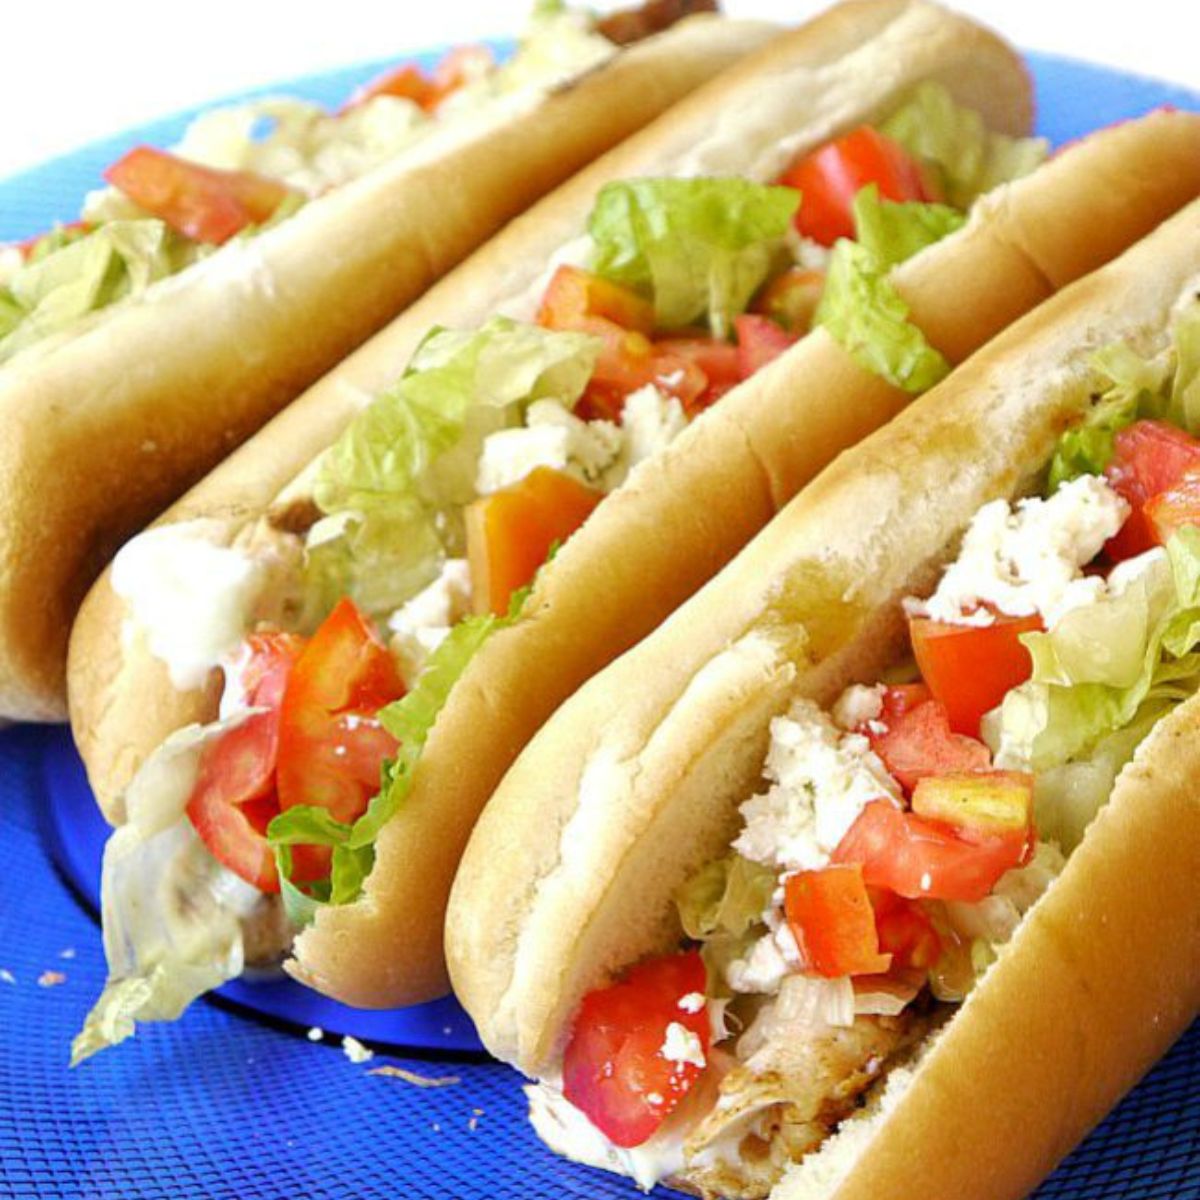 Three grilled chicken hot dogs on a plate.